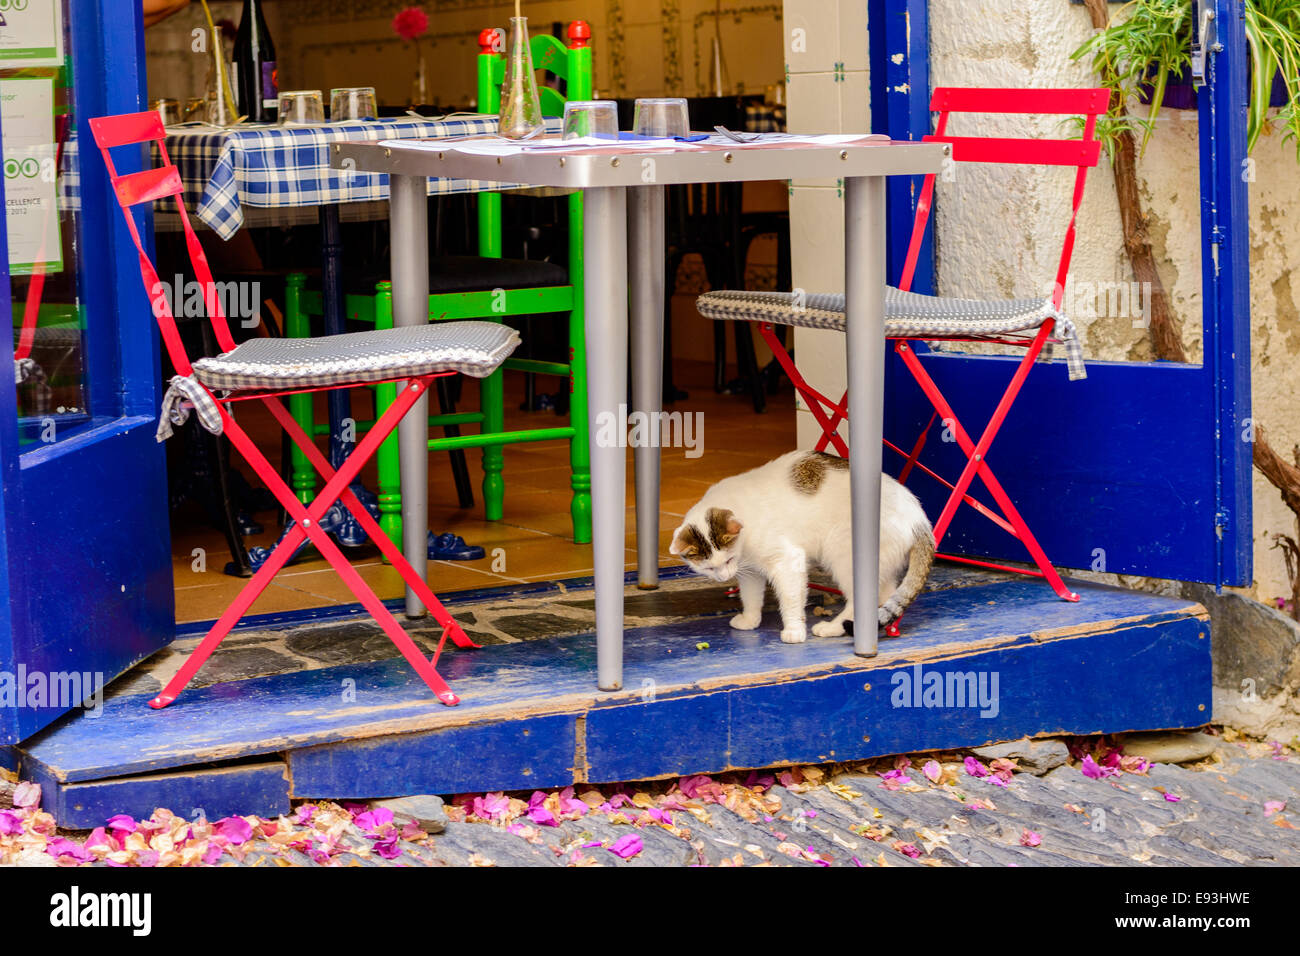 A cat looks for crumbs under the colorful chairs of a restaurant in a cobblestone paved street in the town of Cadaques, Costa Br Stock Photo